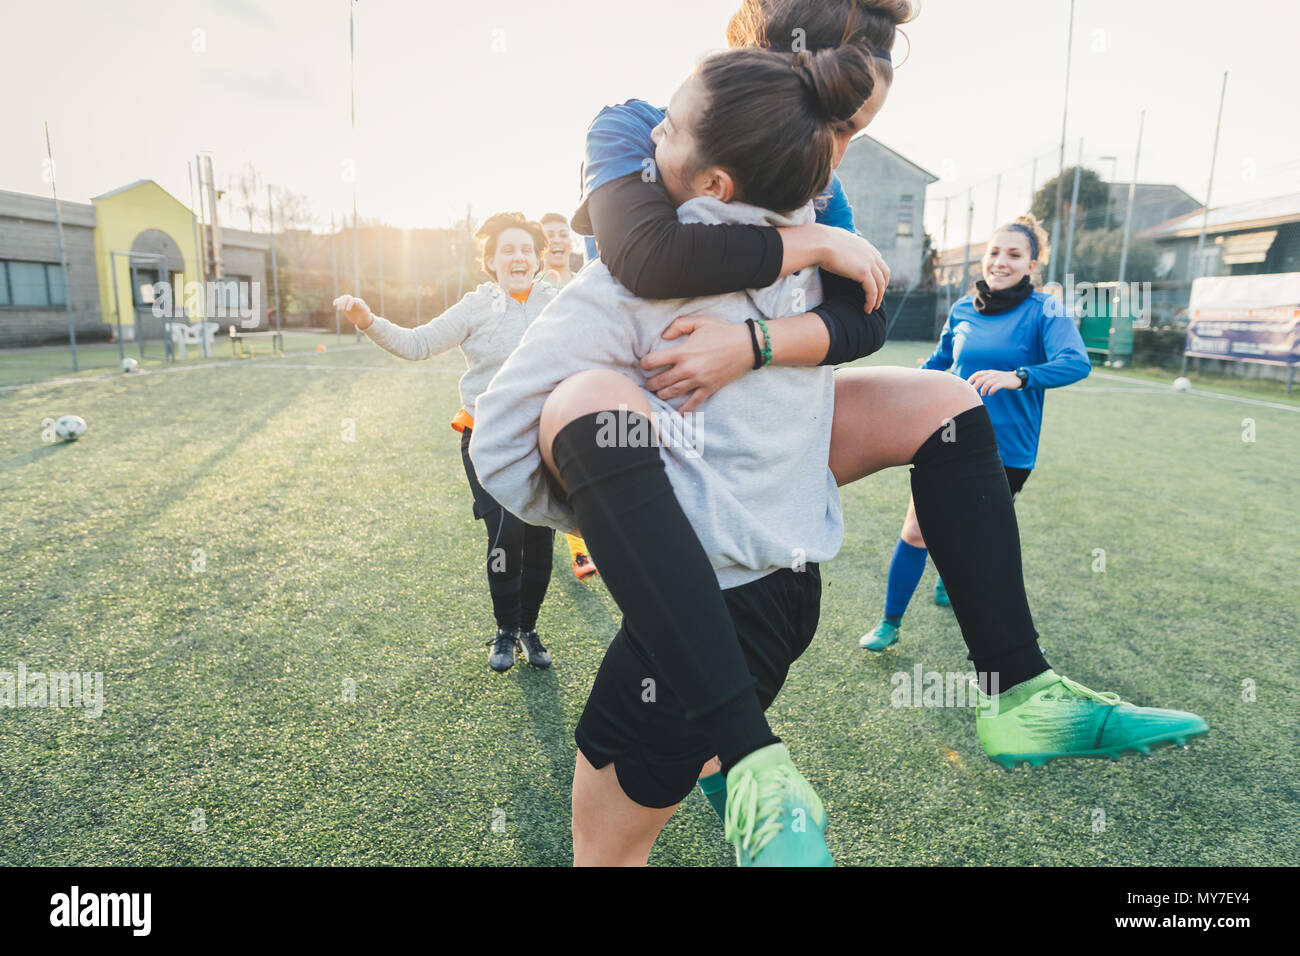 Football players jubilant and hugging on pitch Stock Photo